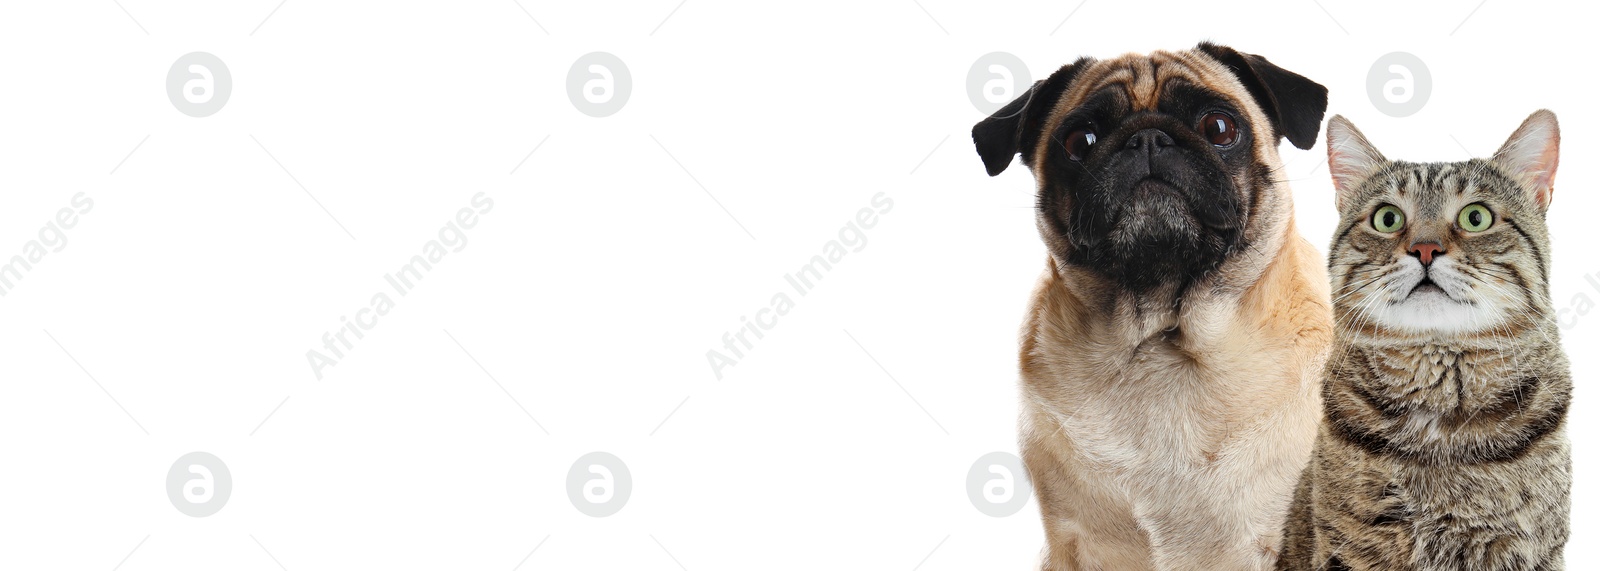 Image of Cute pug dog and cute tabby cat on white background. Banner design with space for text